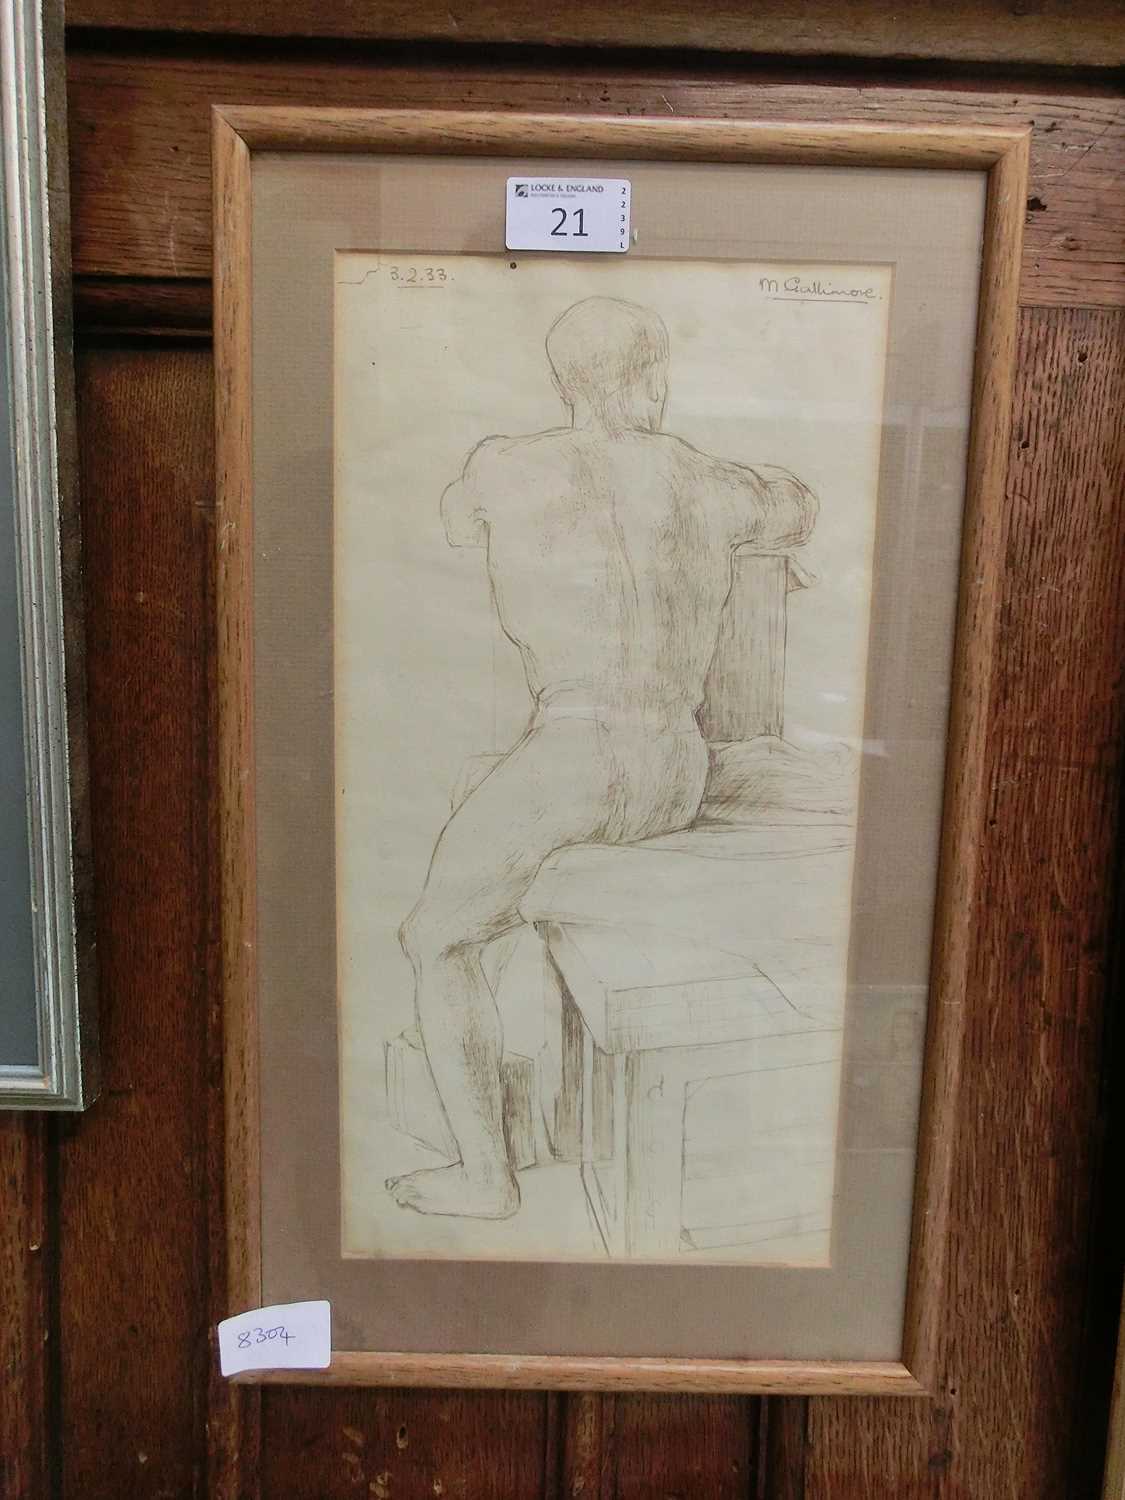 A framed and glazed possible pen drawing of nude man, dated 3/2/'33 signed M Gallimore